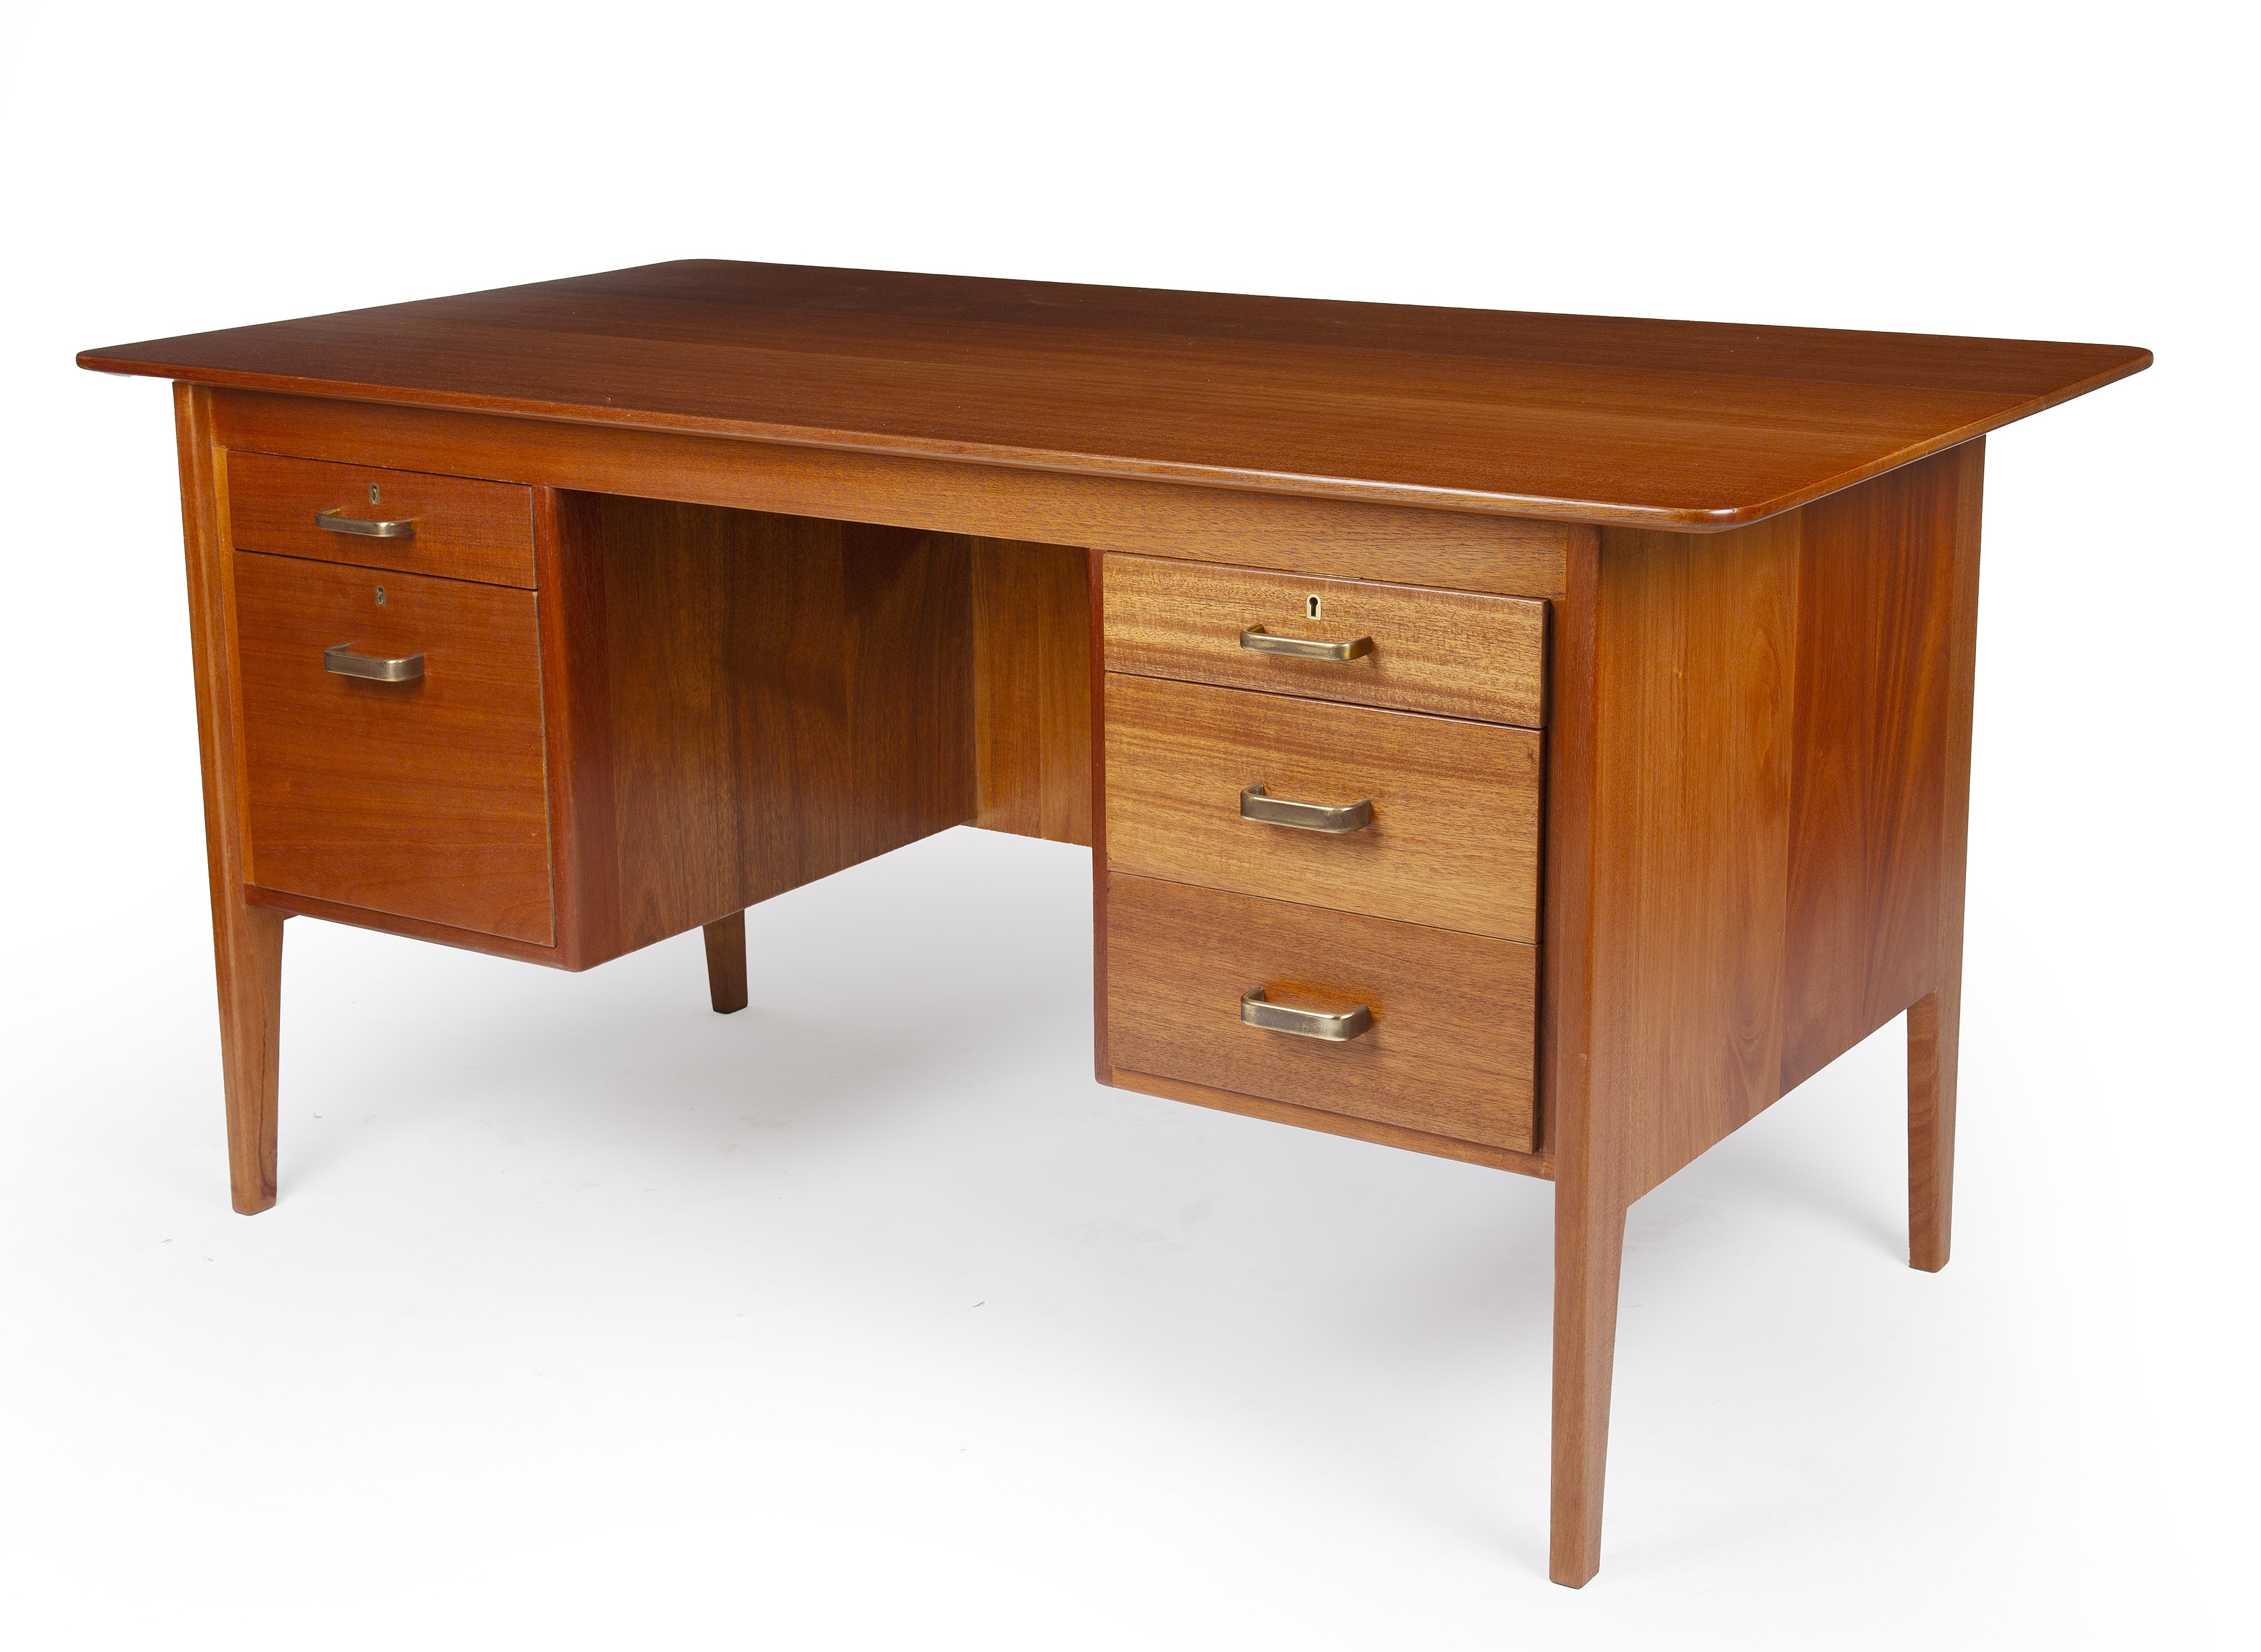 Gordon Russell desk 76cm high, 152cm wide. Stains to upper internal drawers. Key present. Stable and - Image 2 of 10